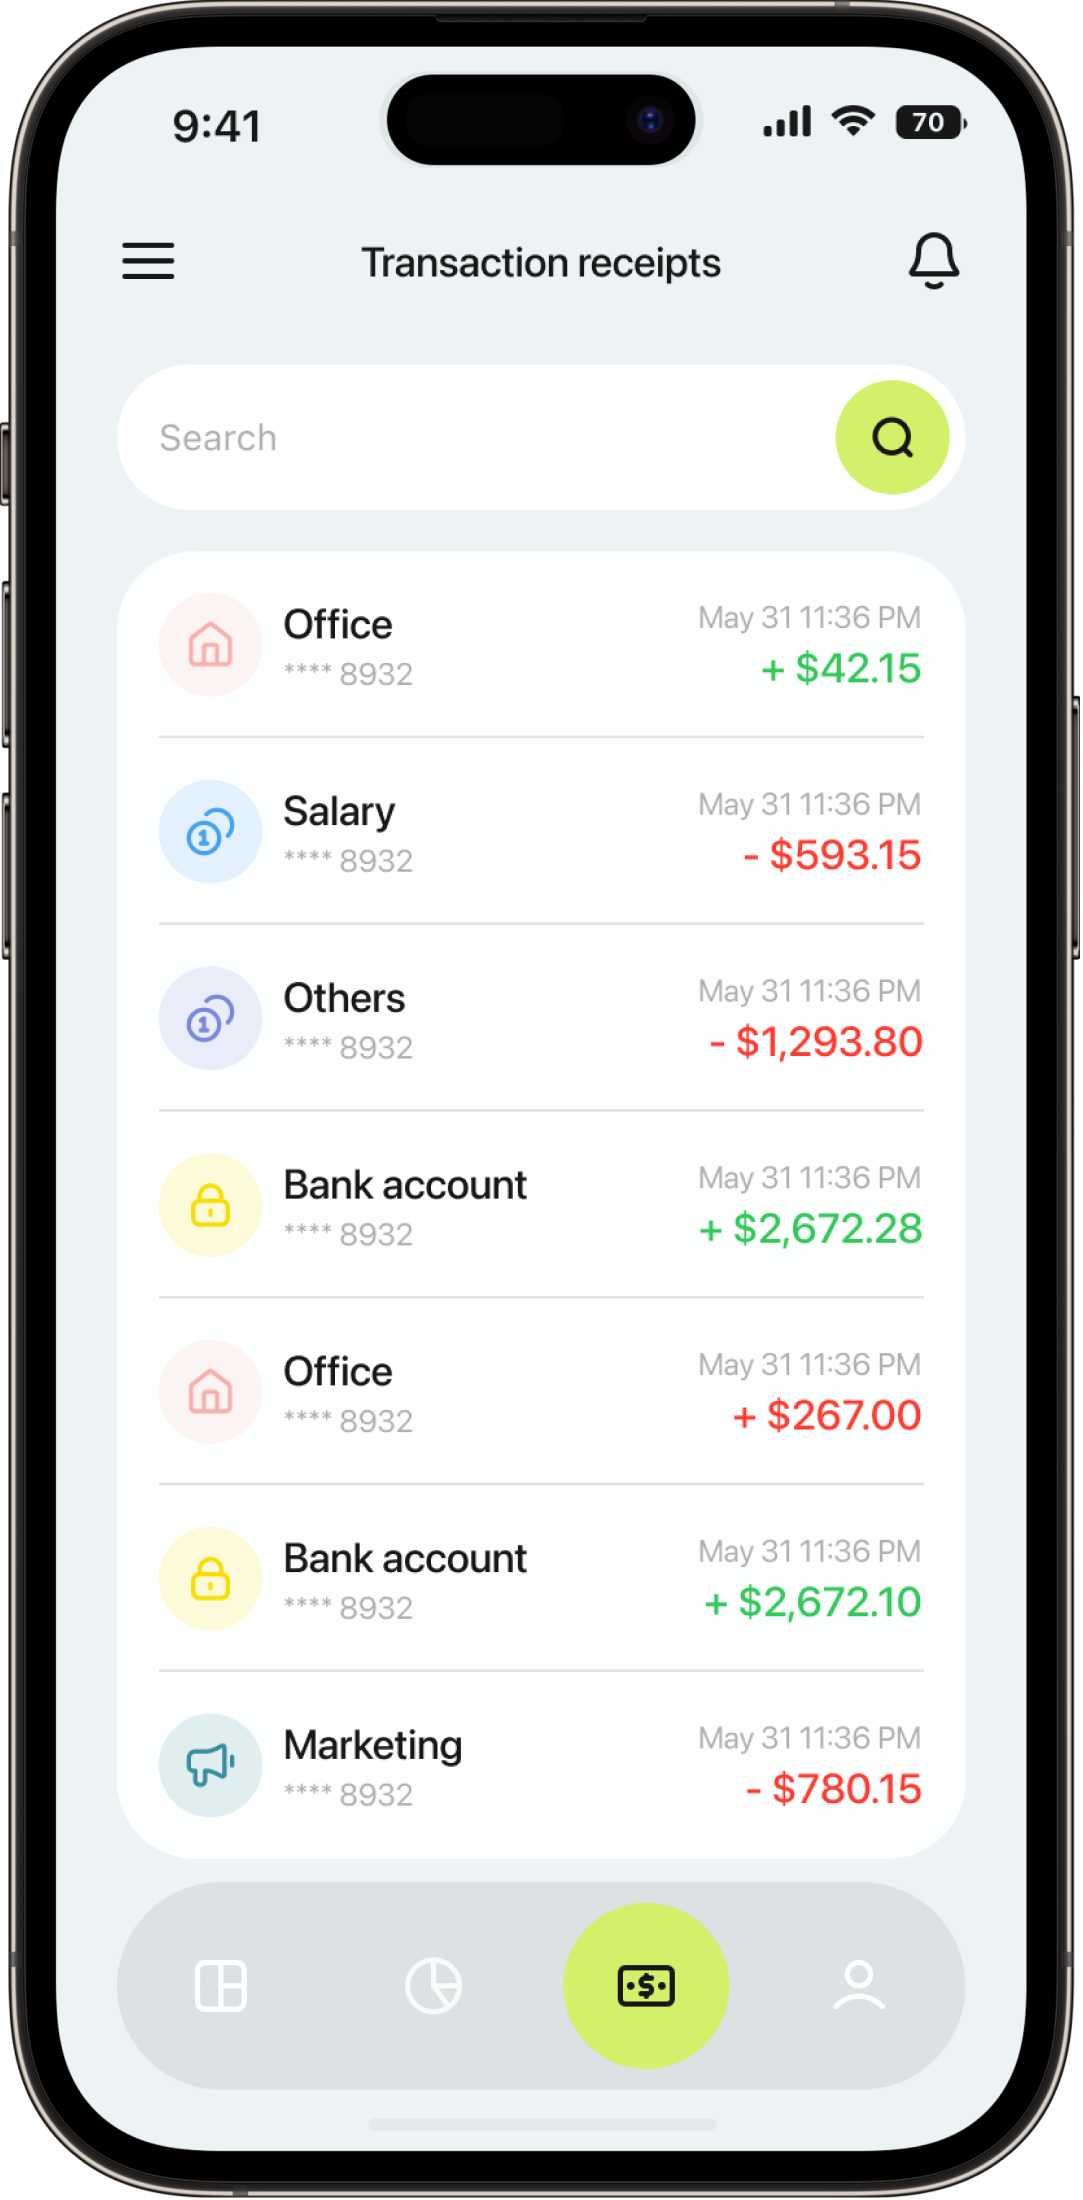 YWS > Works > CaseStudy > Mobile Budgeting  App > Transaction receipts > Image